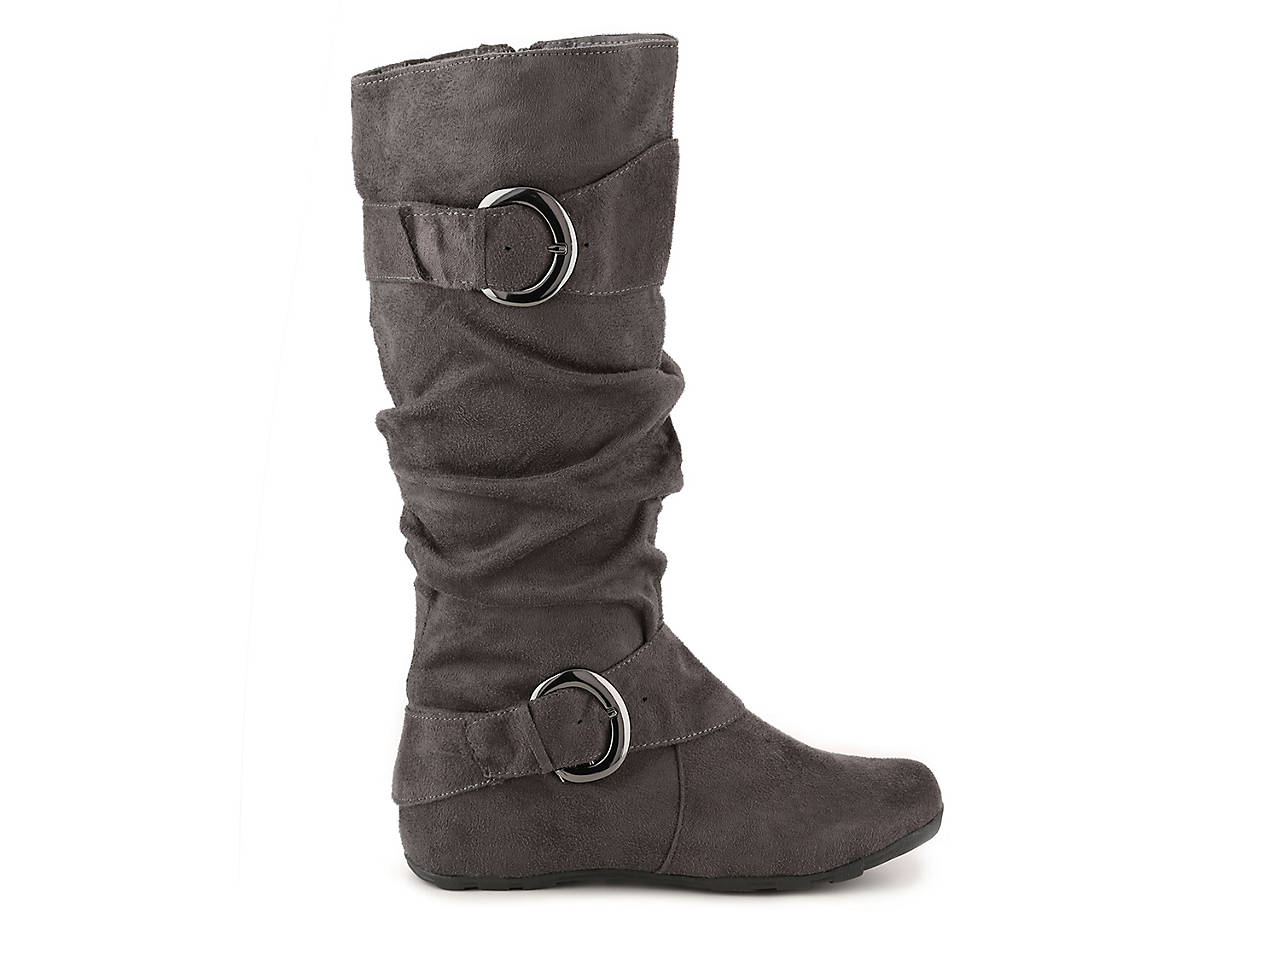 Journee Collection Jester Boot Women's Shoes | DSW